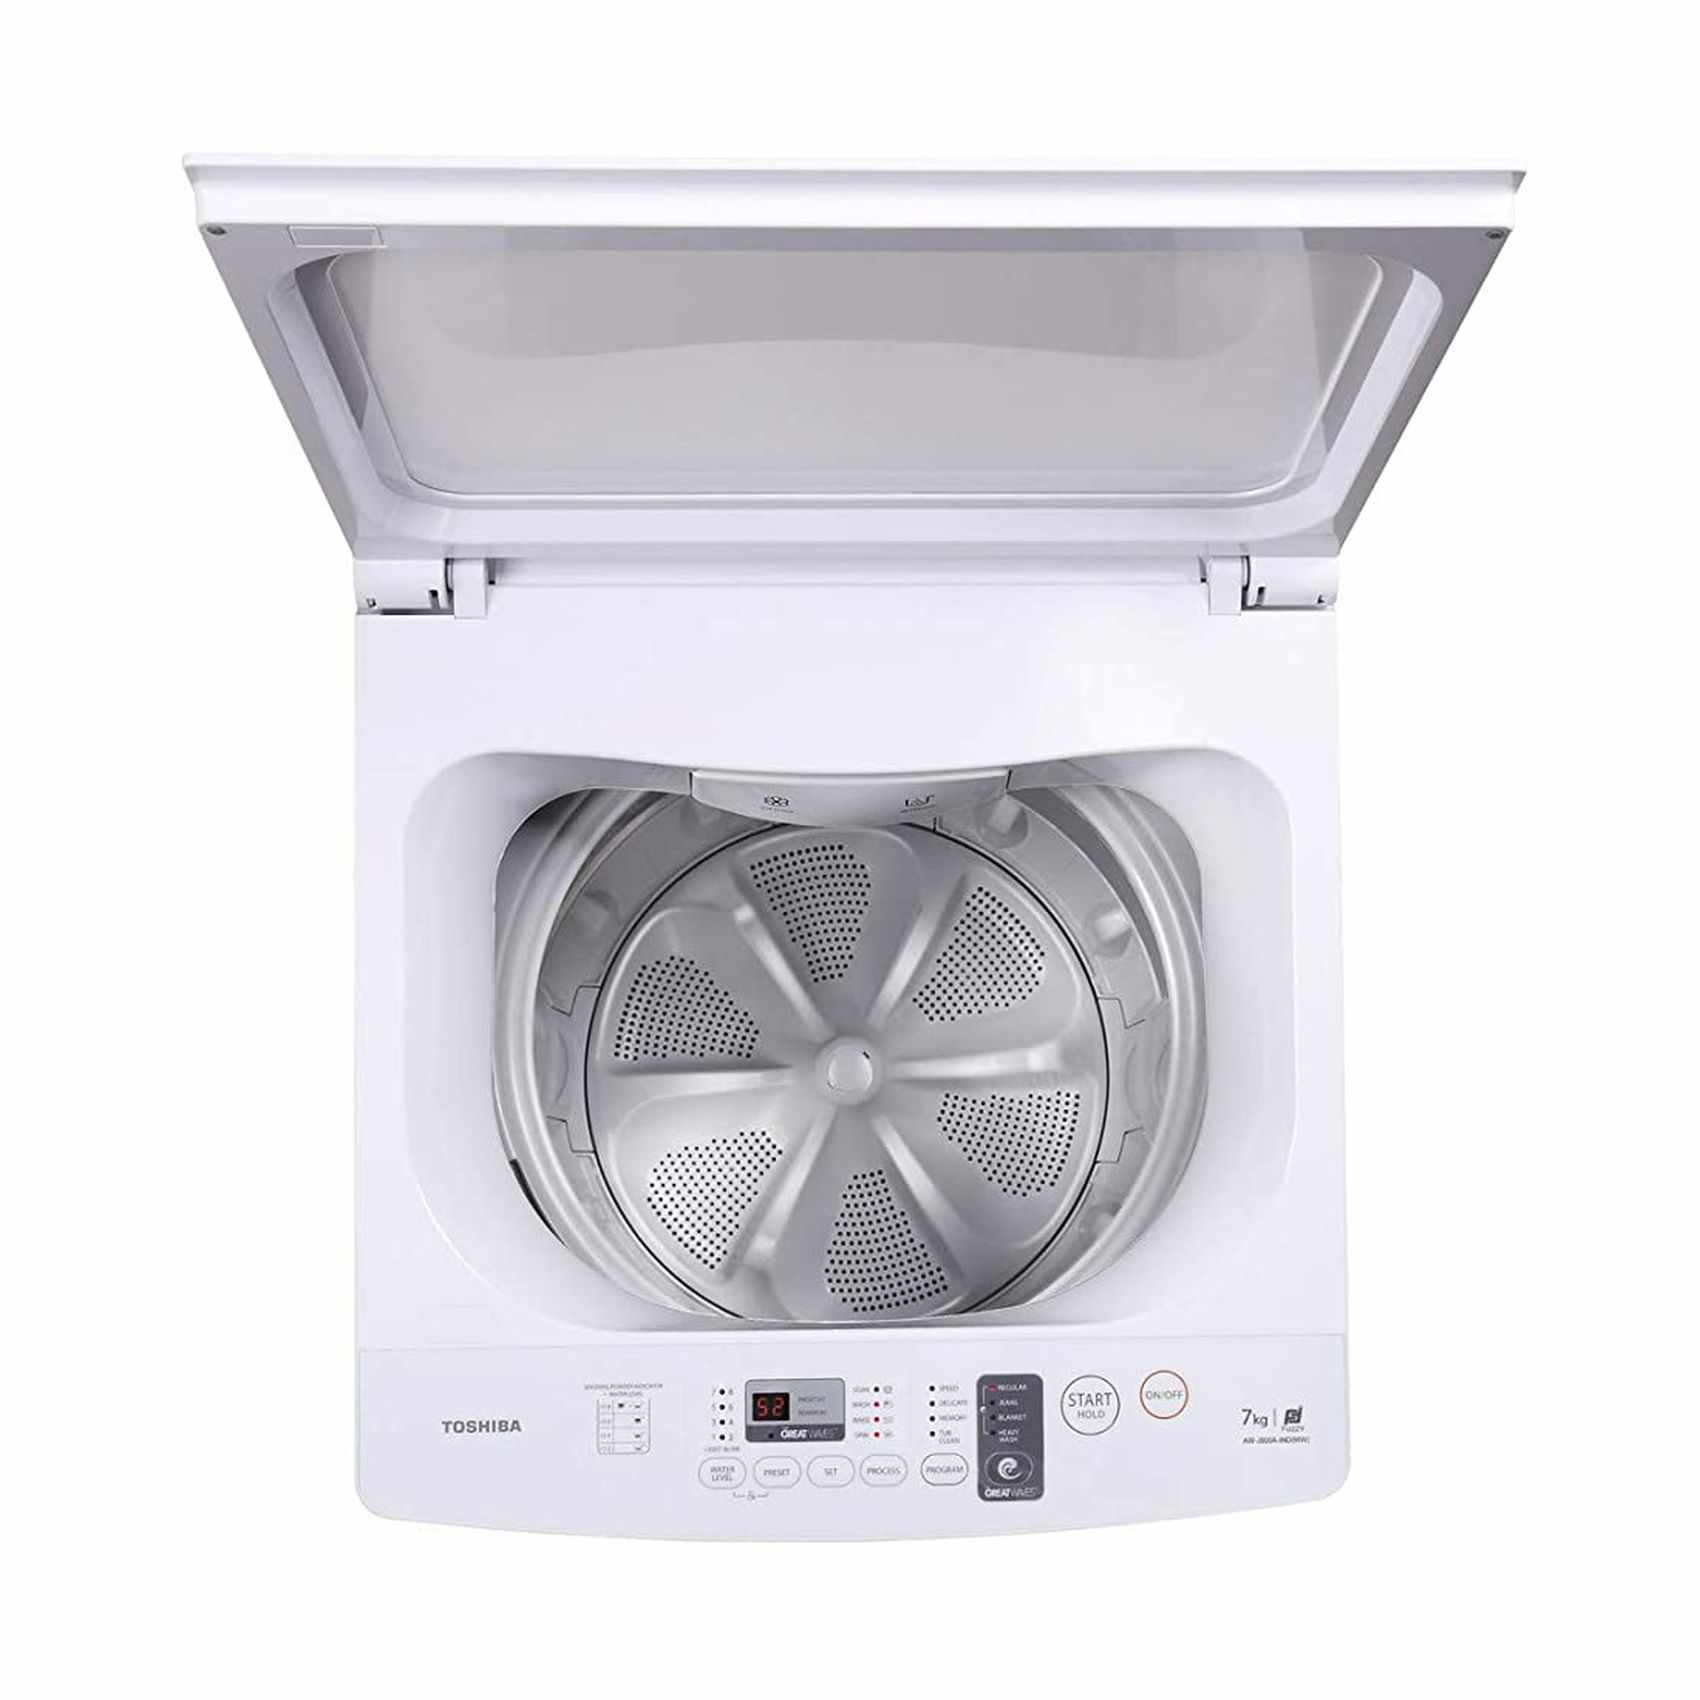 Toshiba AW-J800DUPA Washer With Fragrance Course 7kg